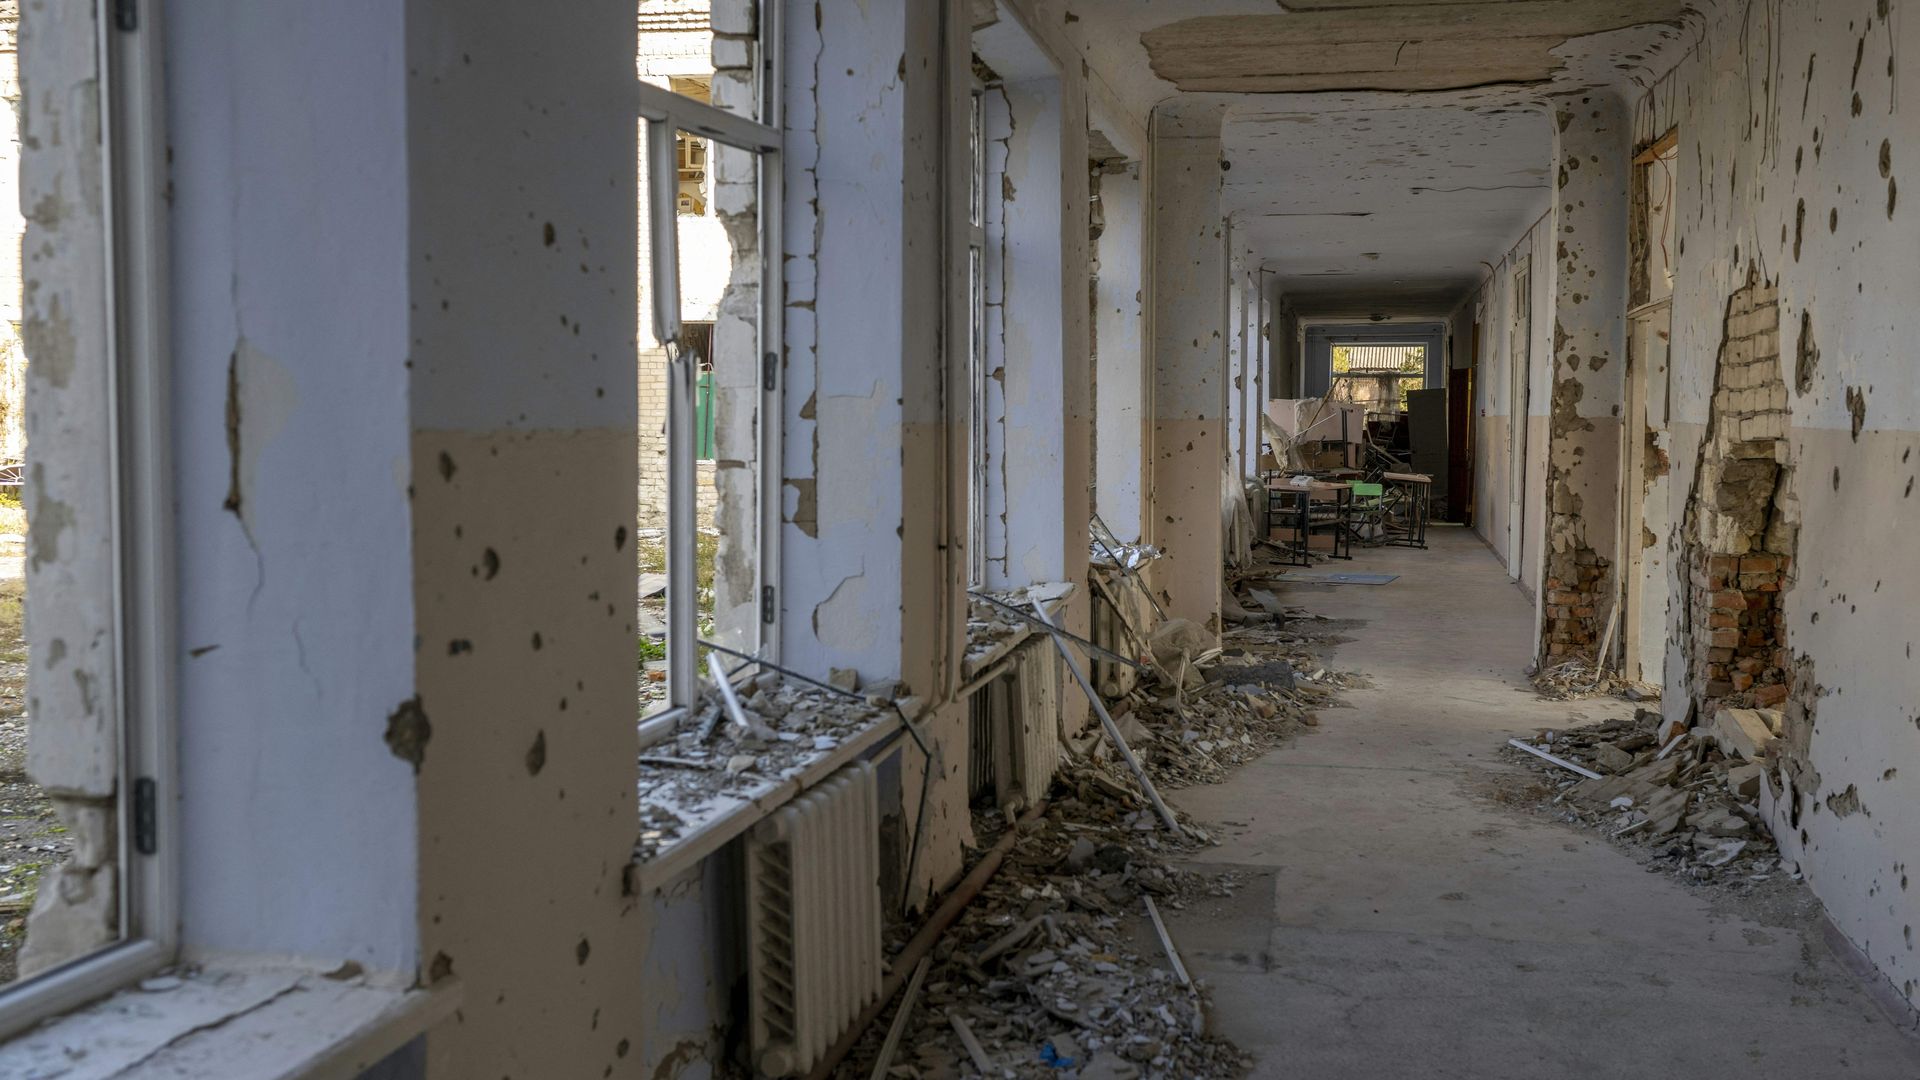 This photograph shows a school corridor in the Kherson region village of Arkhanhelske.